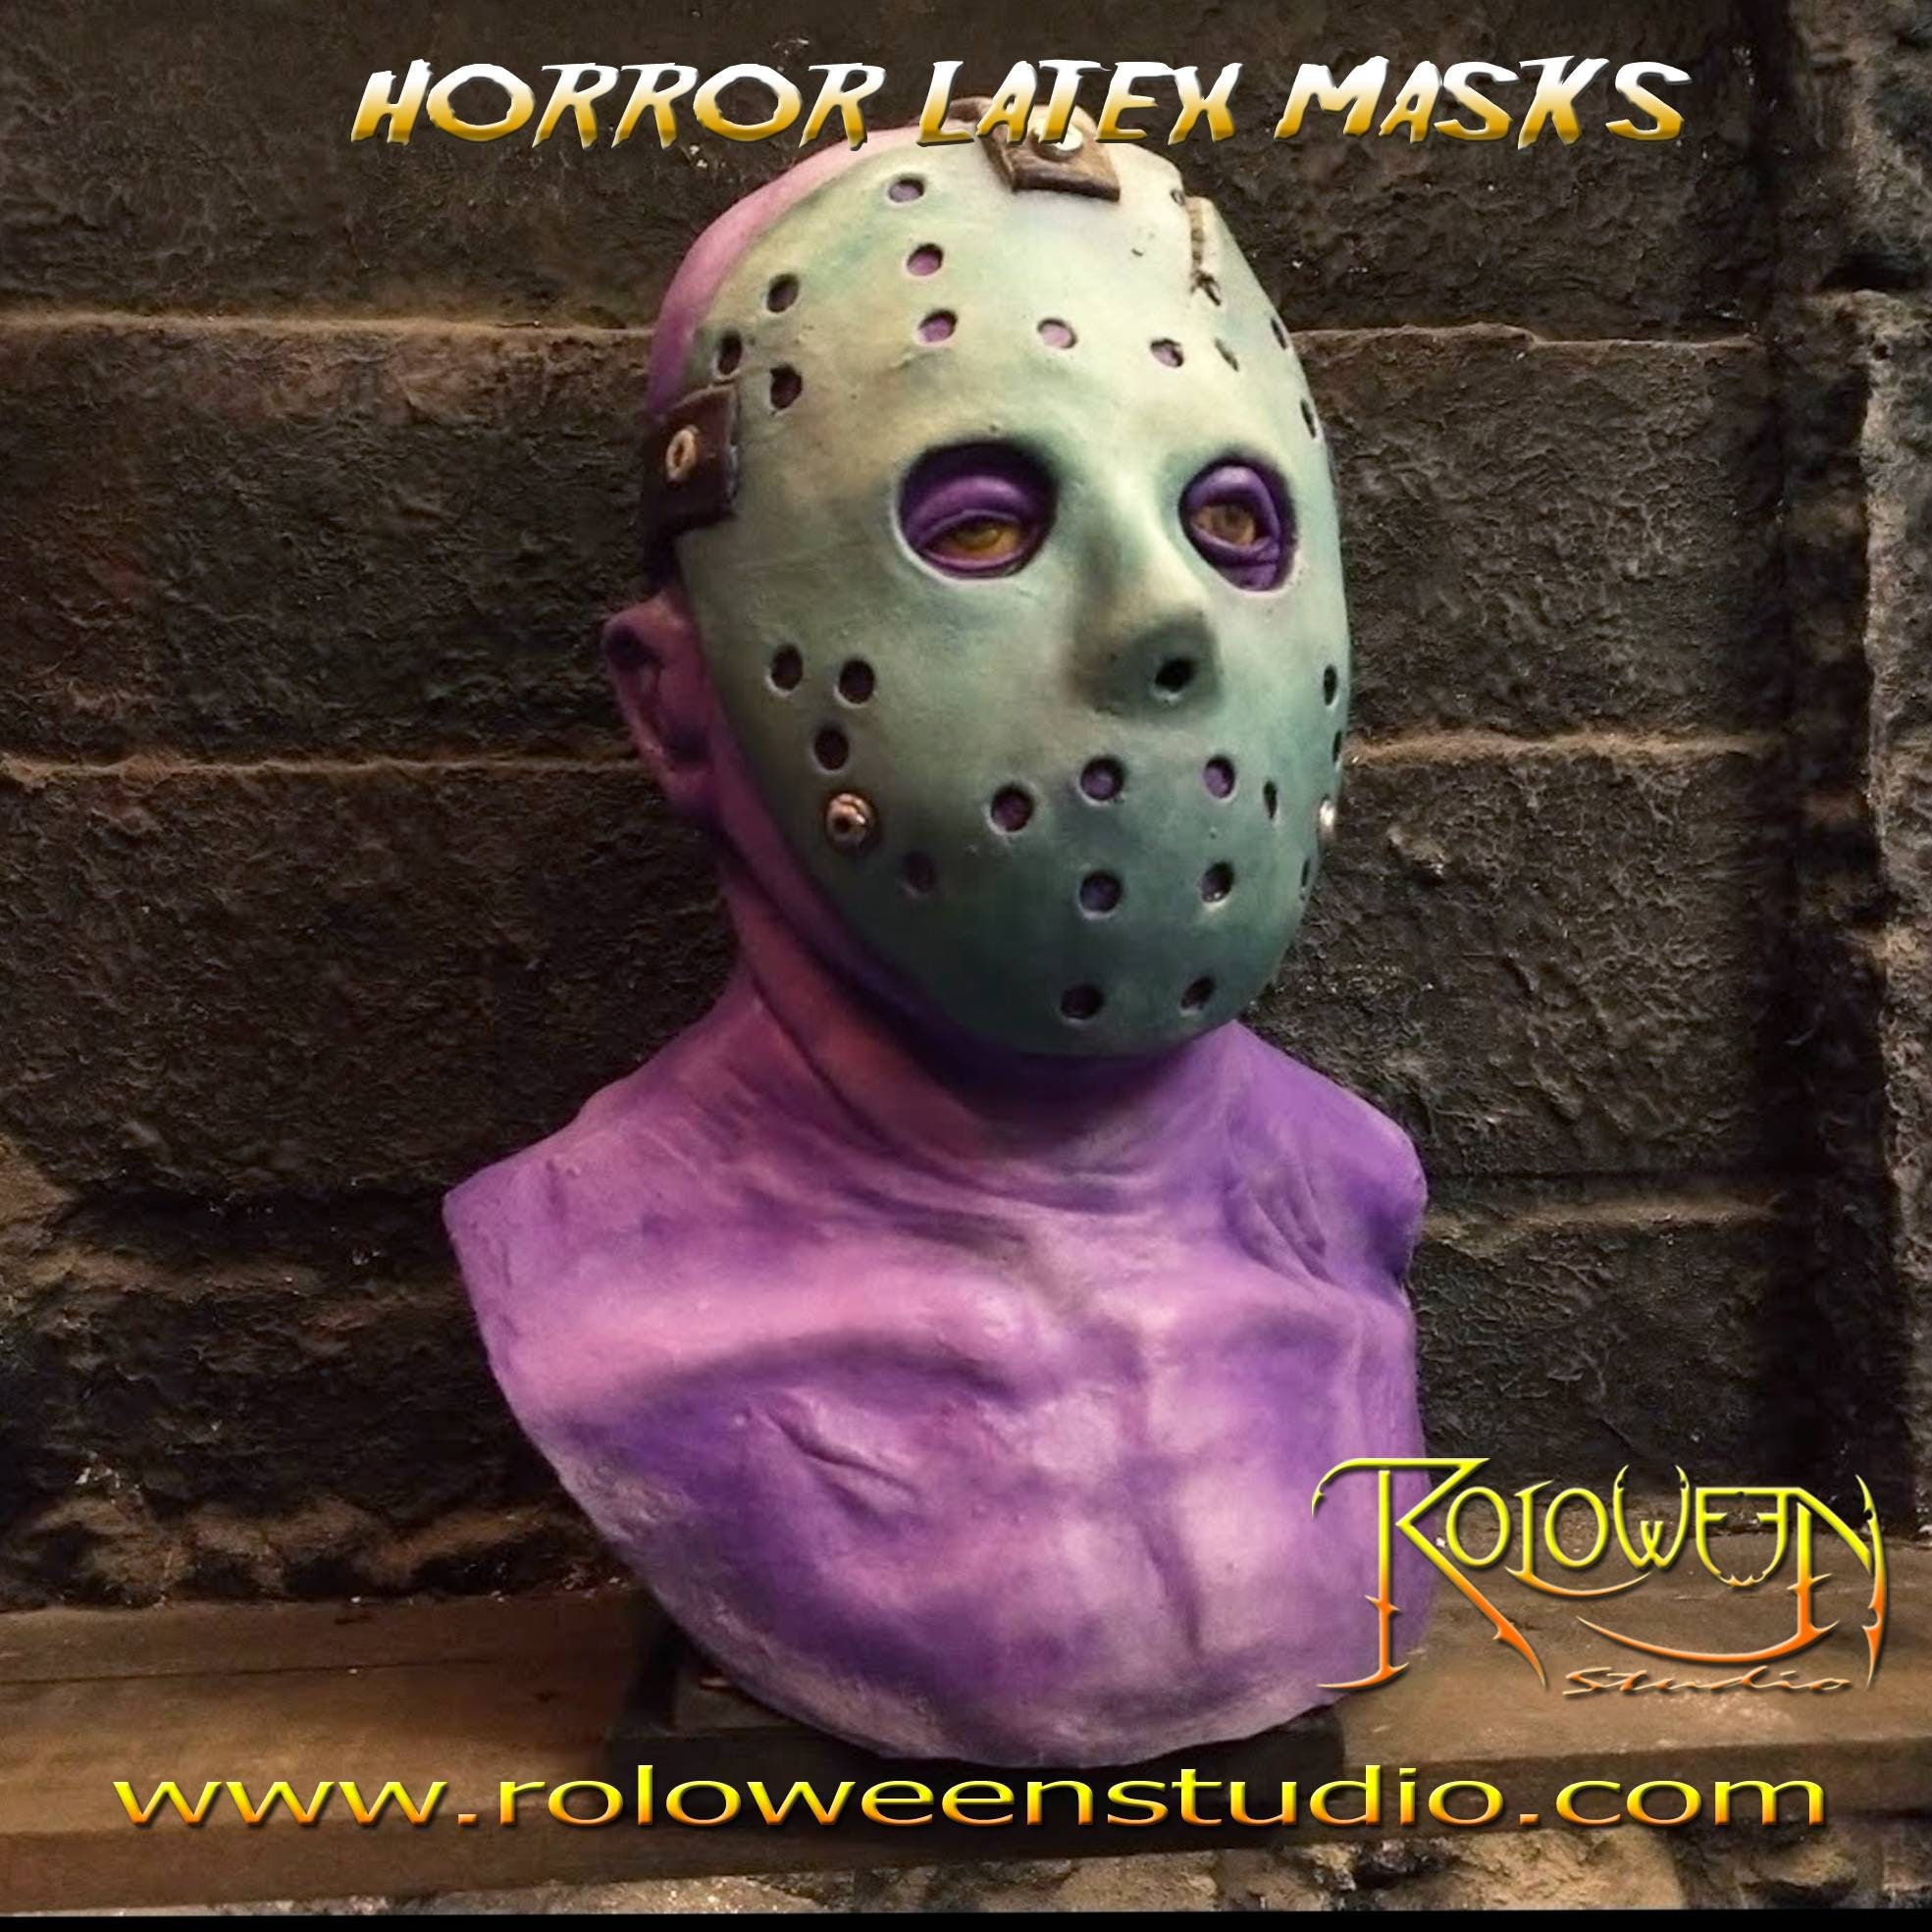 Afgang velordnet tilbede Jason Voorhees Latex Mask 8 Bit Nes Special Edition Video - Etsy Finland